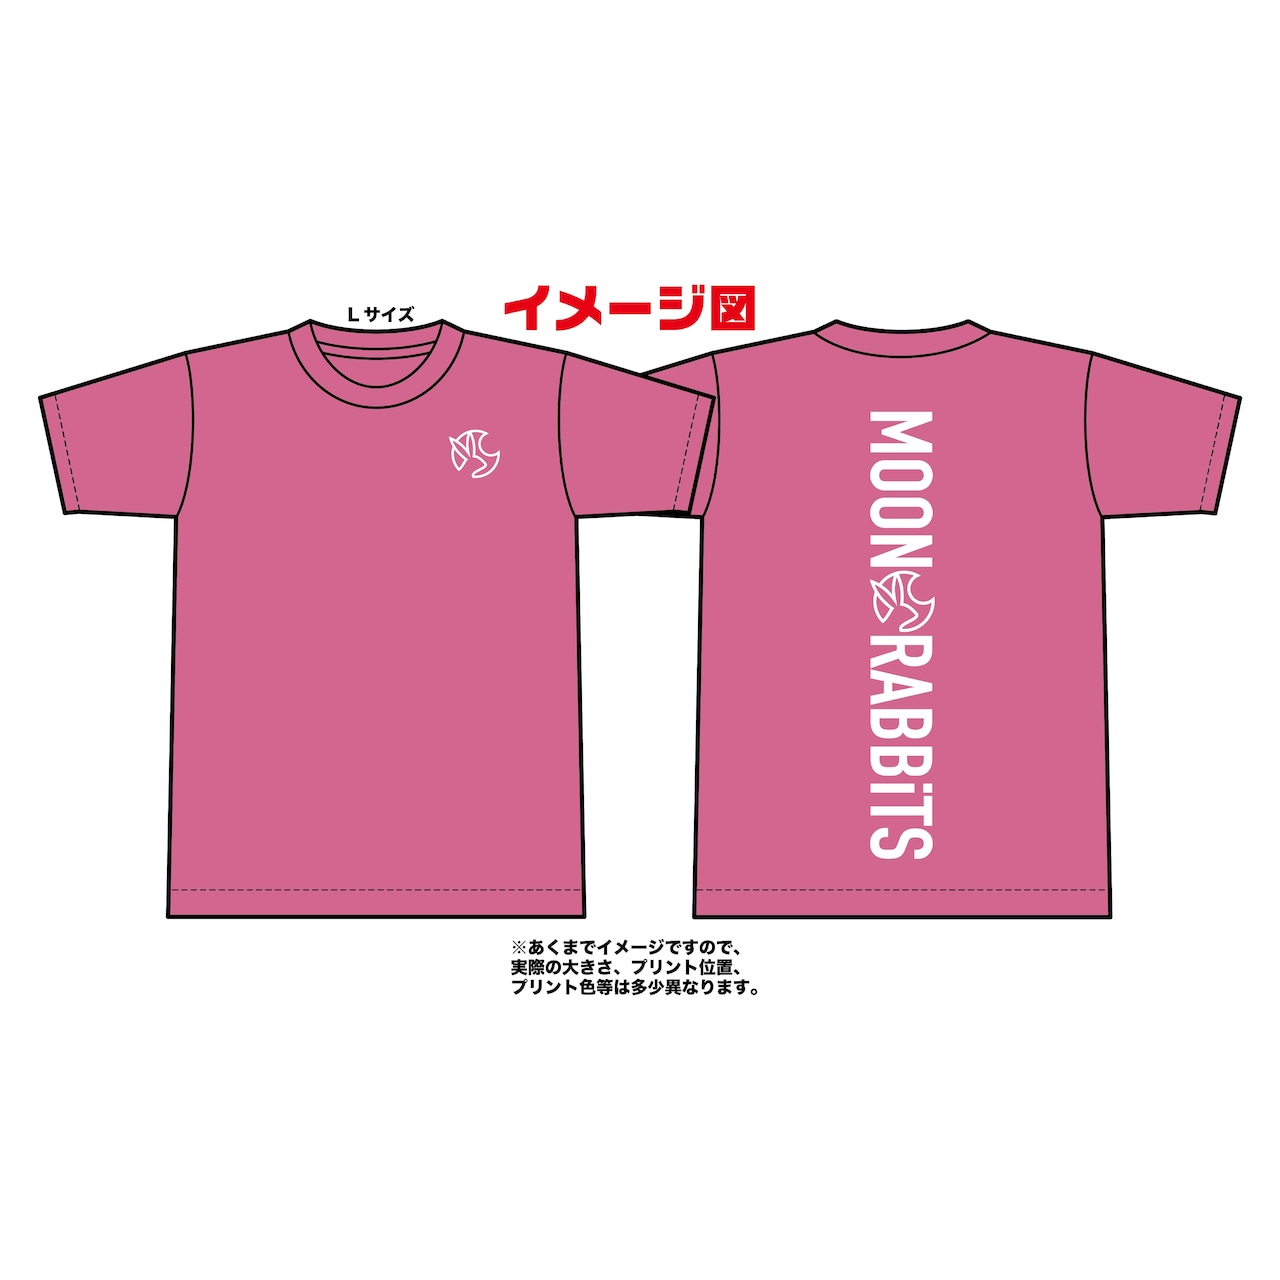 One point Icon T-shirt(Cherry pink)